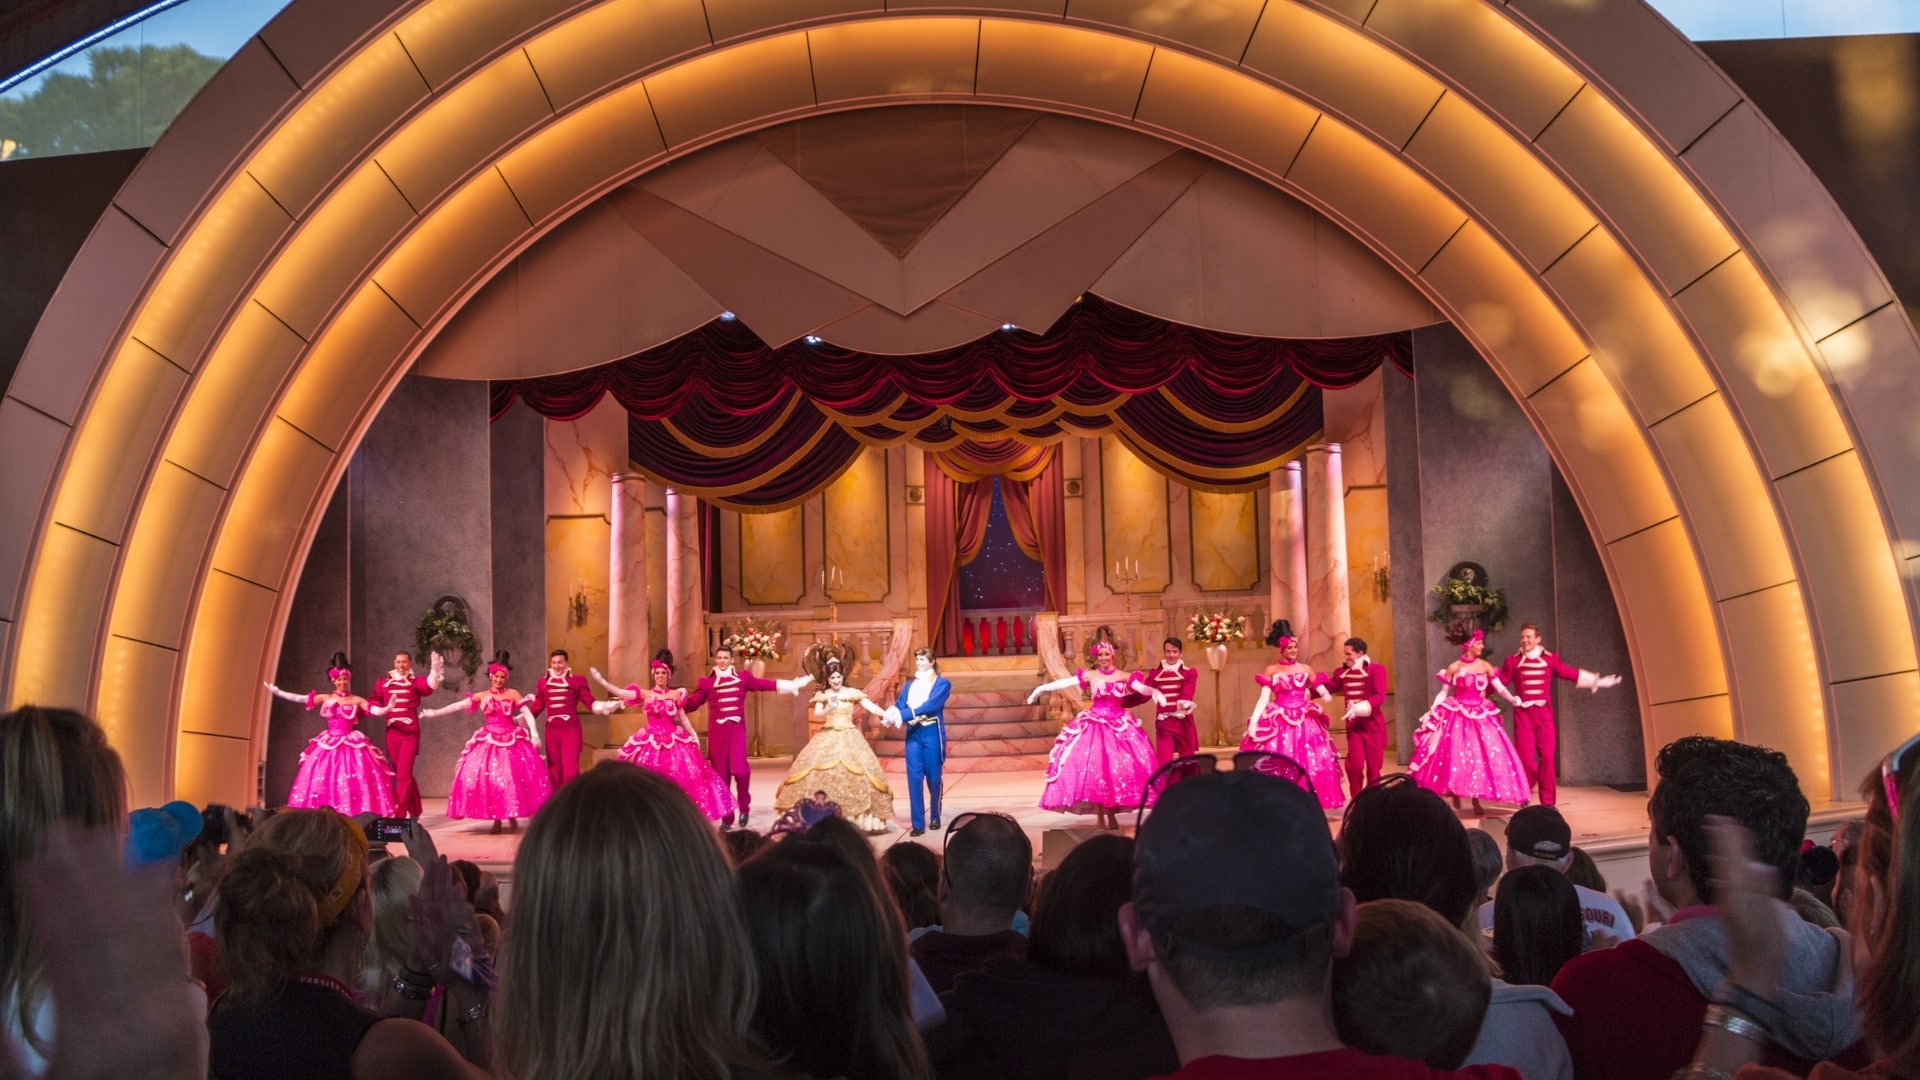 Shows at Disney's Hollywood Studios in Orlando - Beauty and the Beast